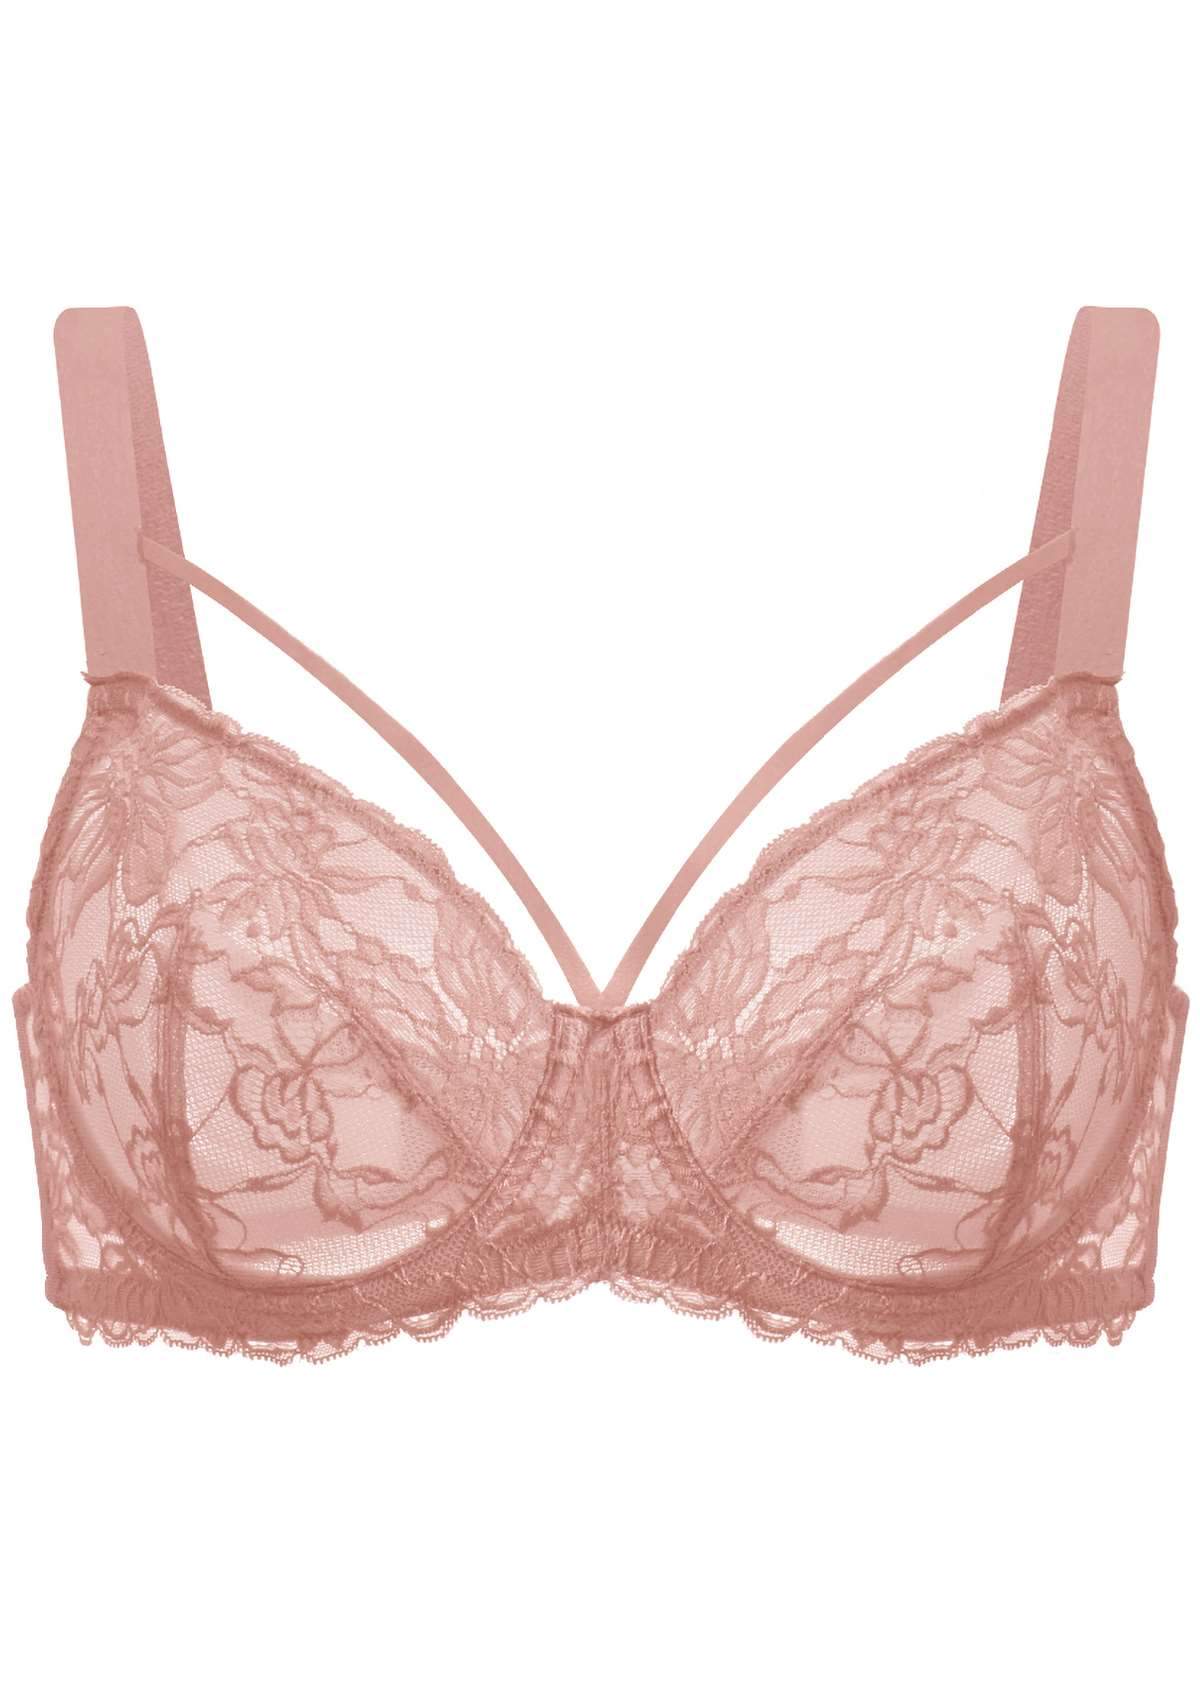 HSIA Pretty In Petals Lace Bra And Panty Sets: Bra For Big Boobs - Light Coral / 34 / DDD/F